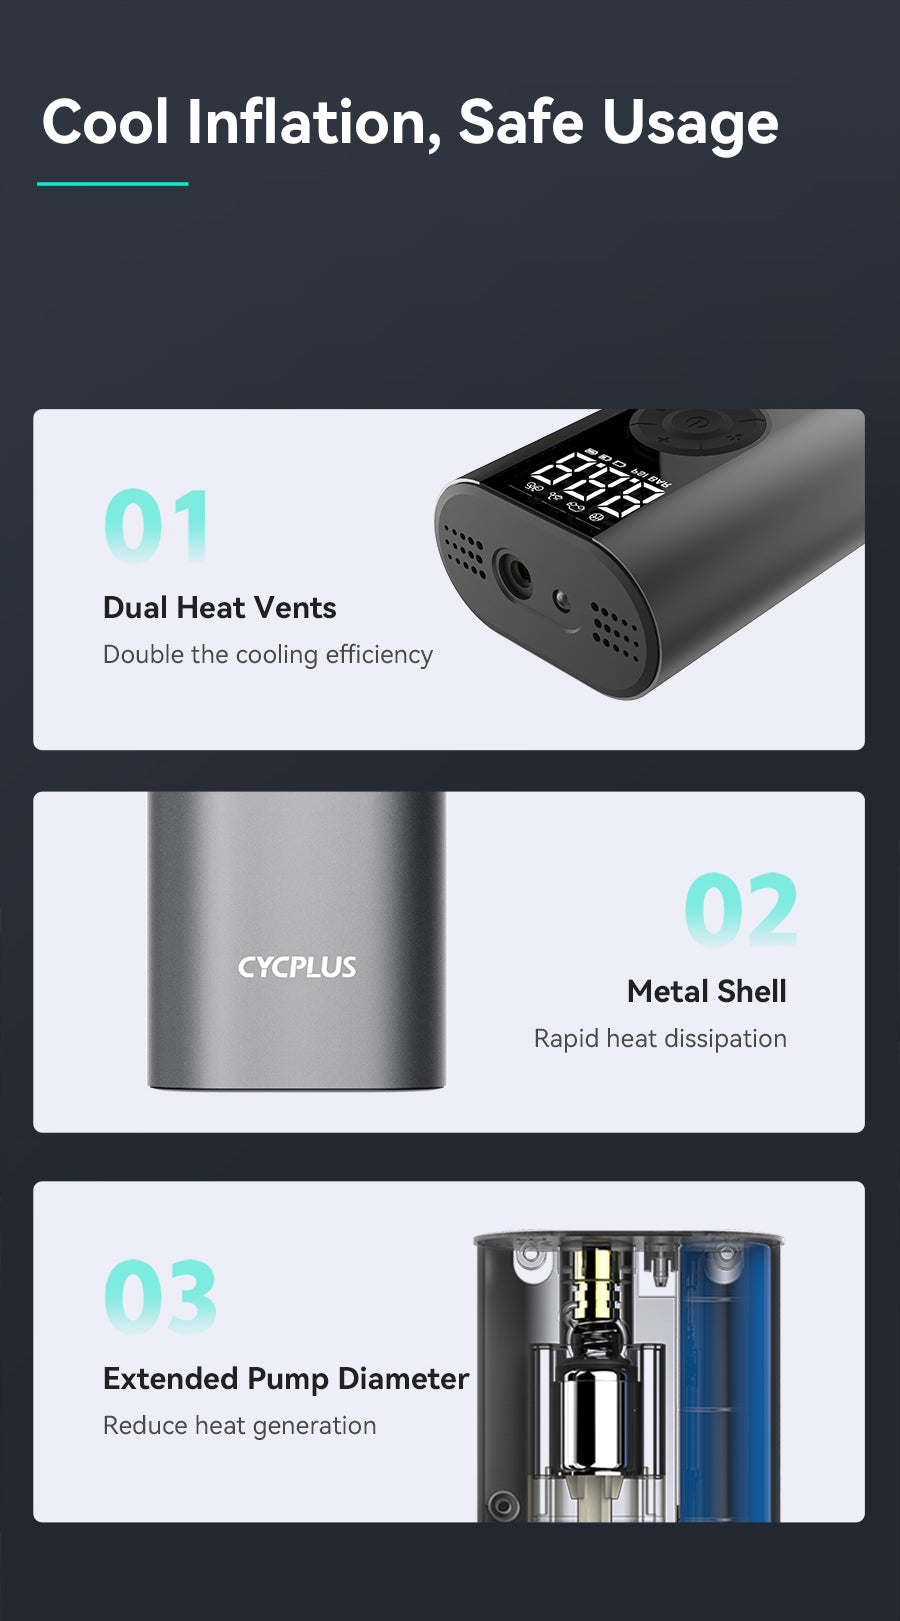 Cool Inflation, Safe Usage   01: Dual Heat Vents Double the cooling efficiency  02: Metal Shell Rapid heat dissipation  03: Extended Pump Diameter Reduce heat generation